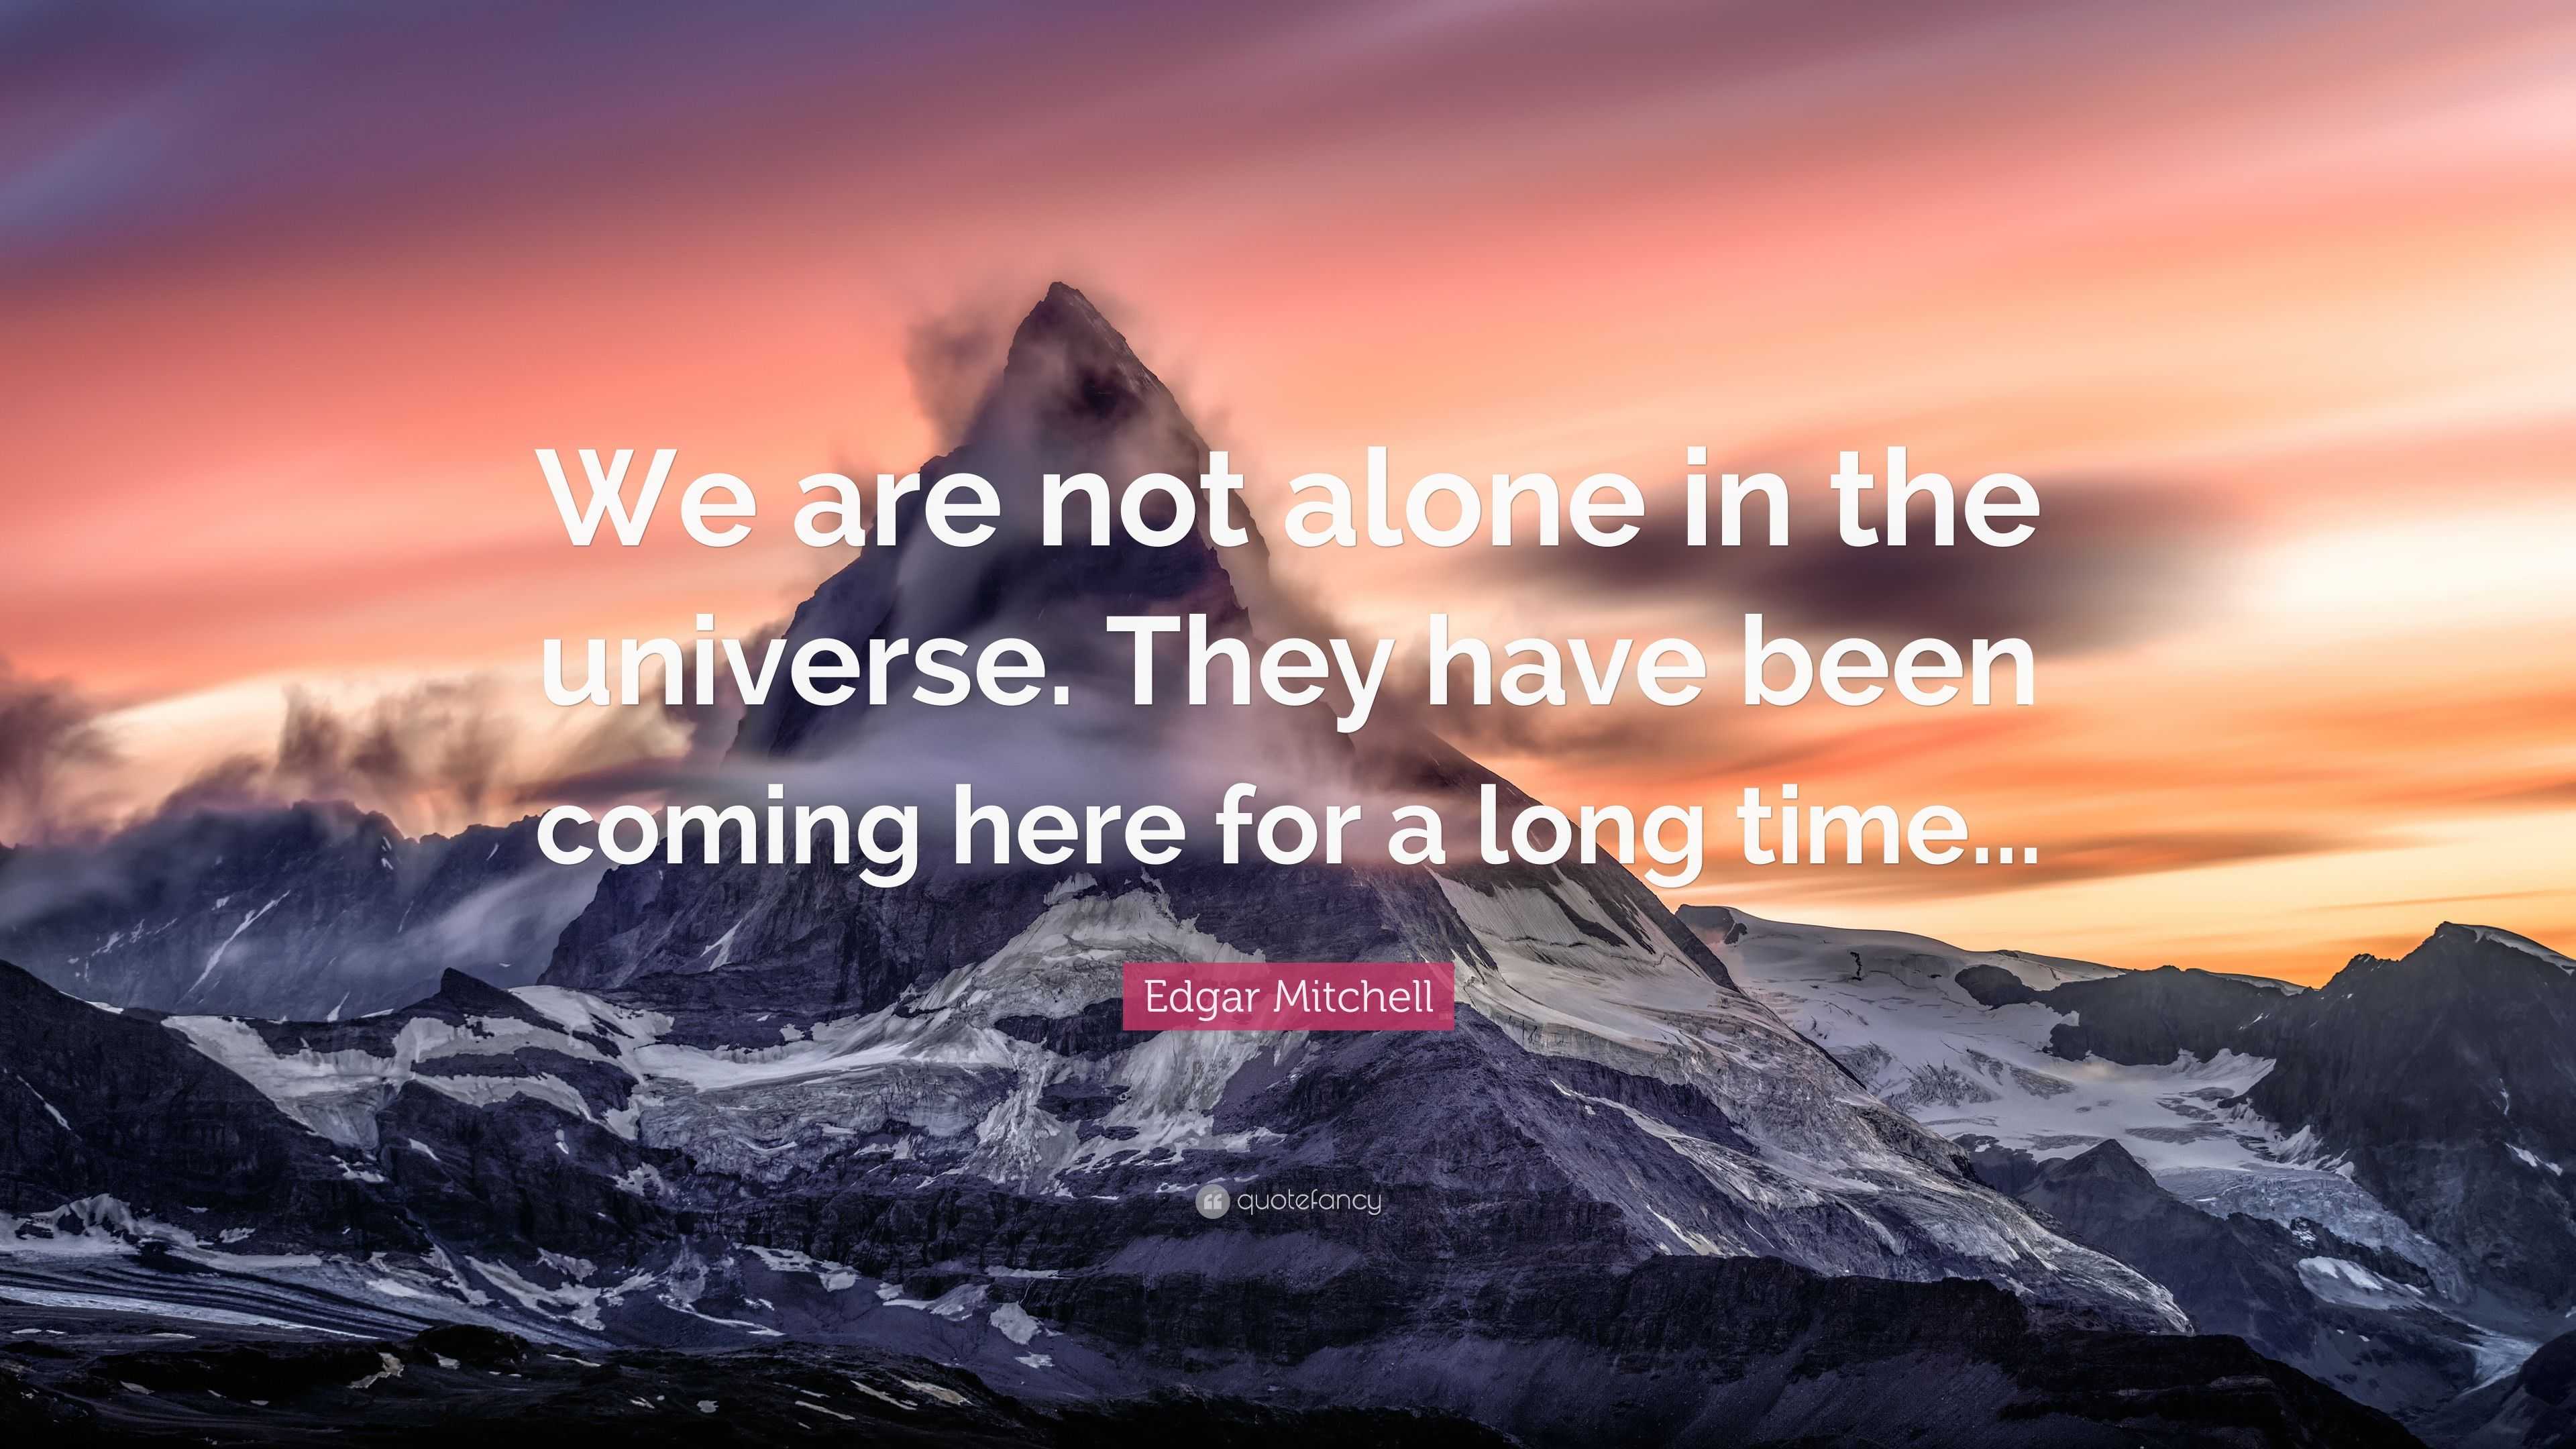 Edgar Mitchell Quote: "We are not alone in the universe. They have been coming here for a long ...